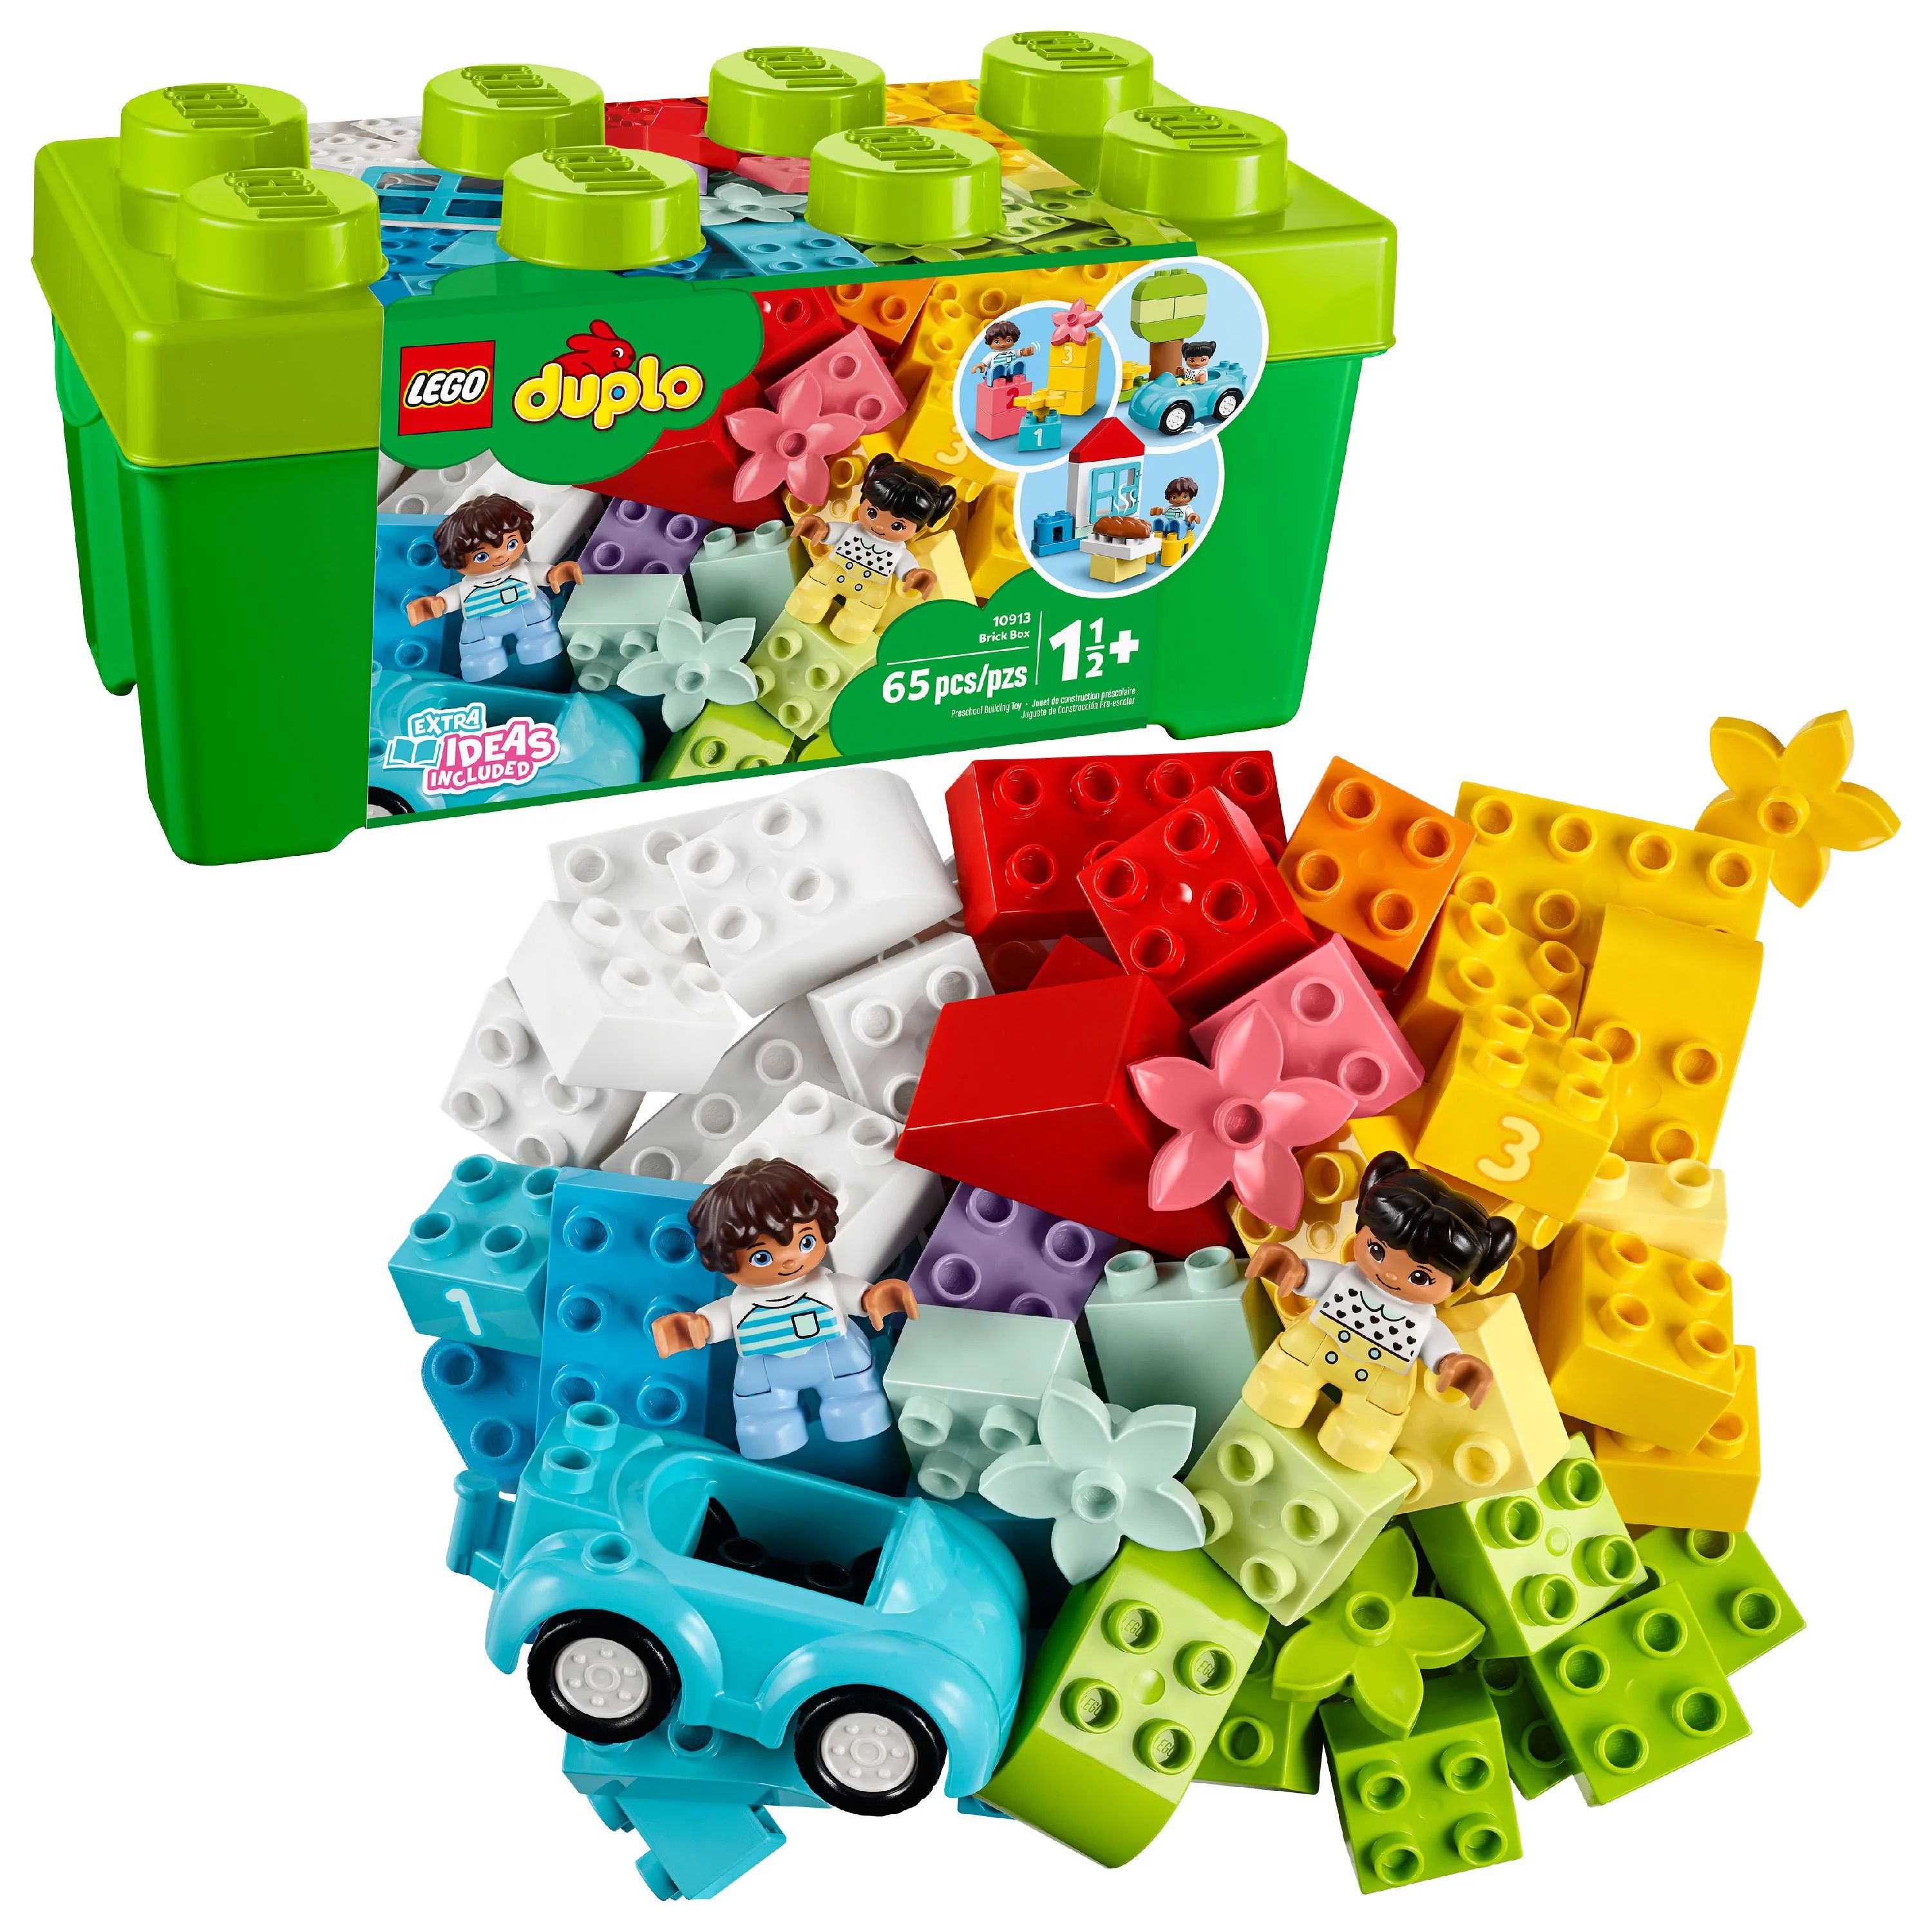 LEGO DUPLO Classic Brick Box 10913, Great Educational Toy for Toddlers 18 Months and up (65 Piece... | Walmart (US)